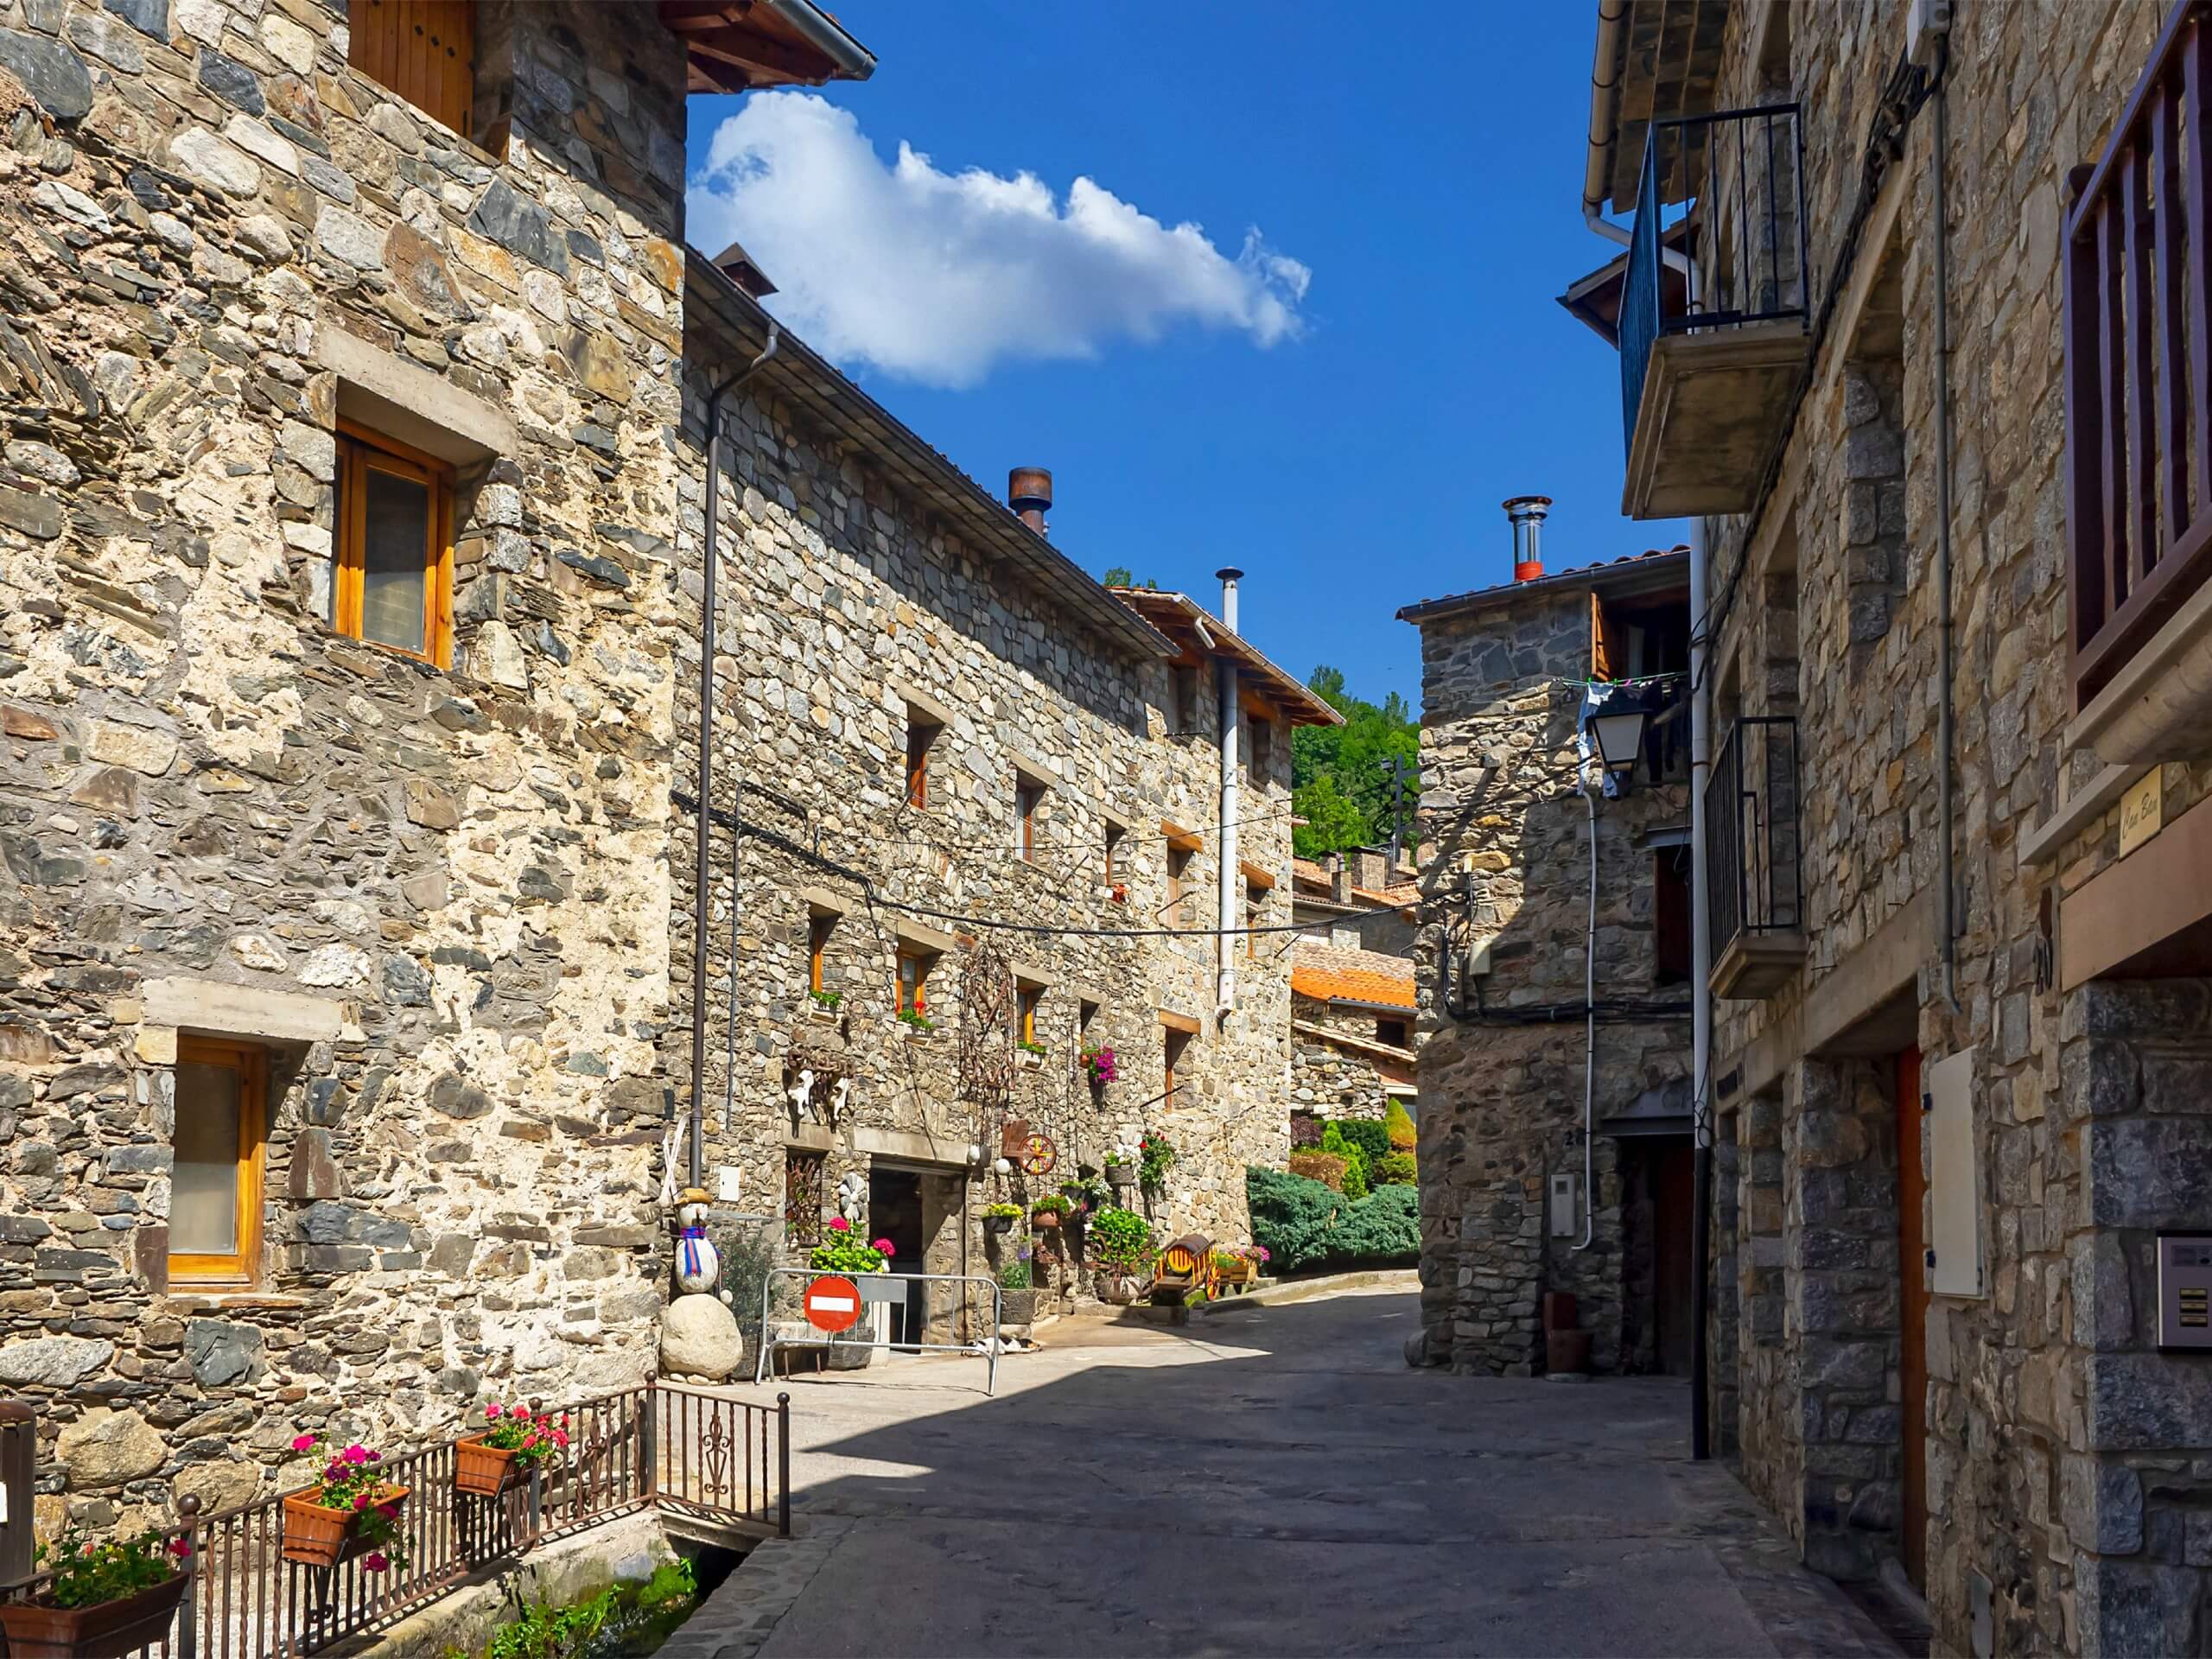 Walking the beautiful streets of the small mountain village in Catalonia